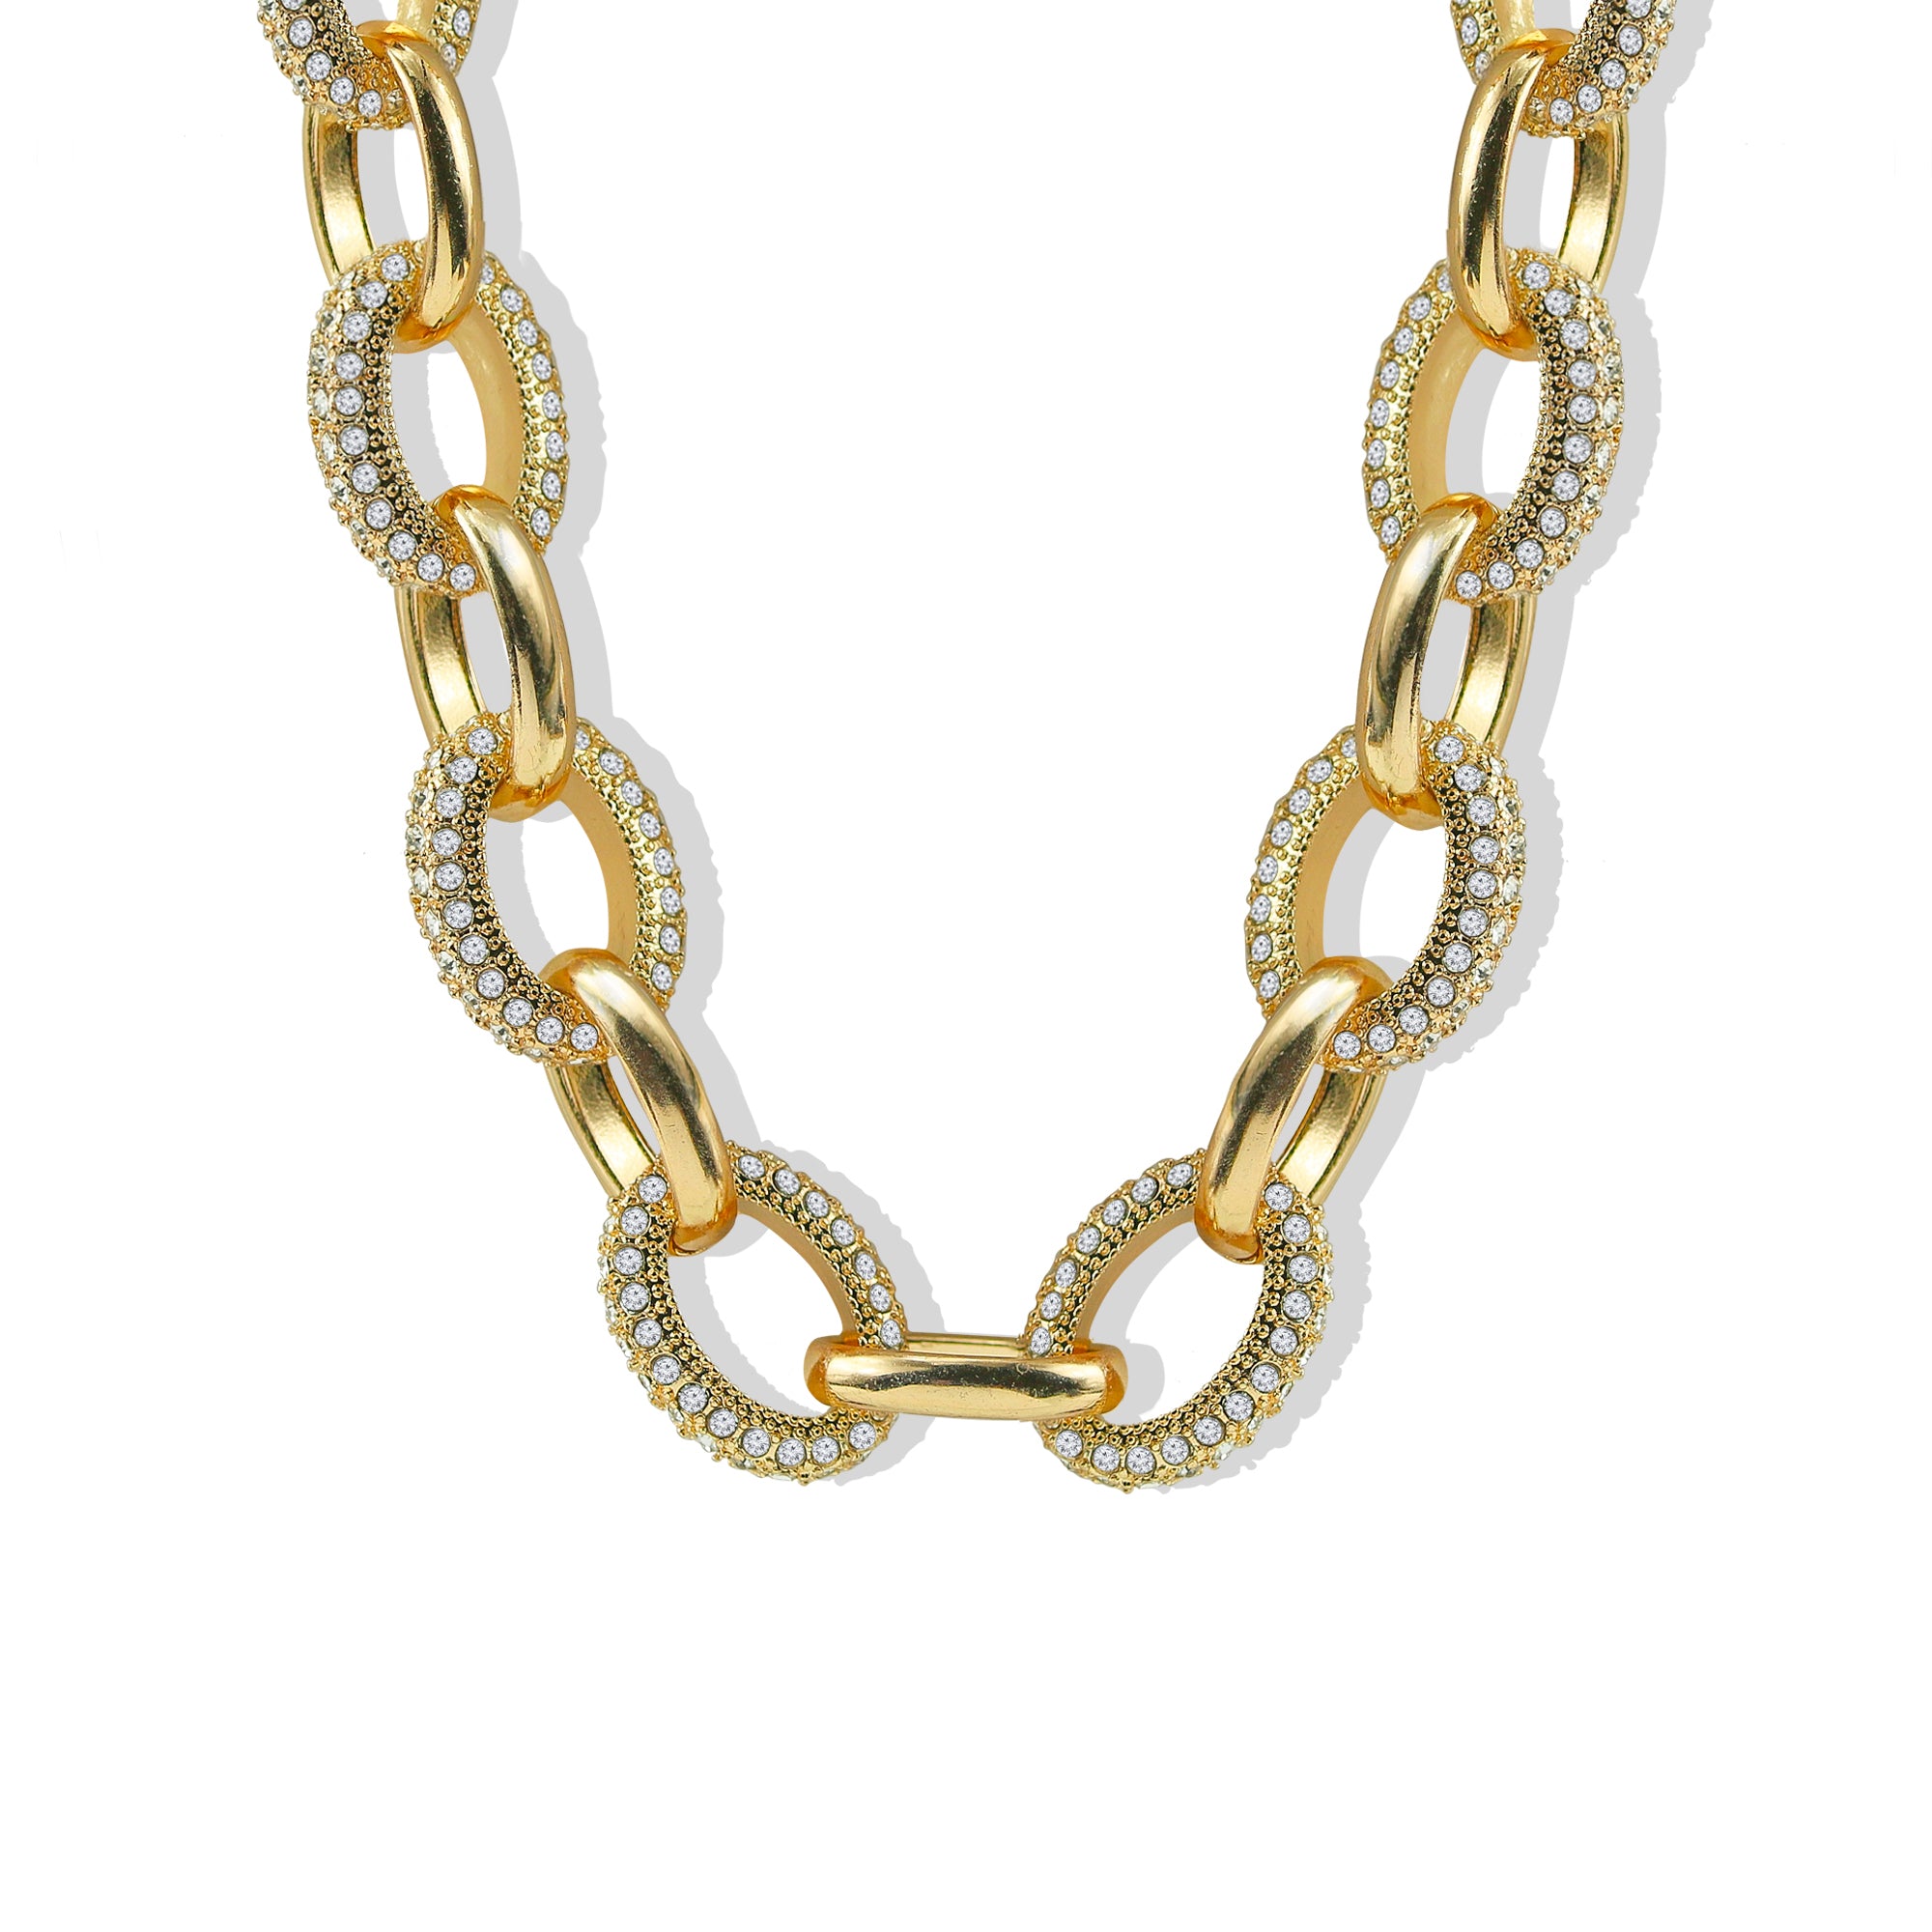 THE ANTOINETTE CHAIN NECKLACE